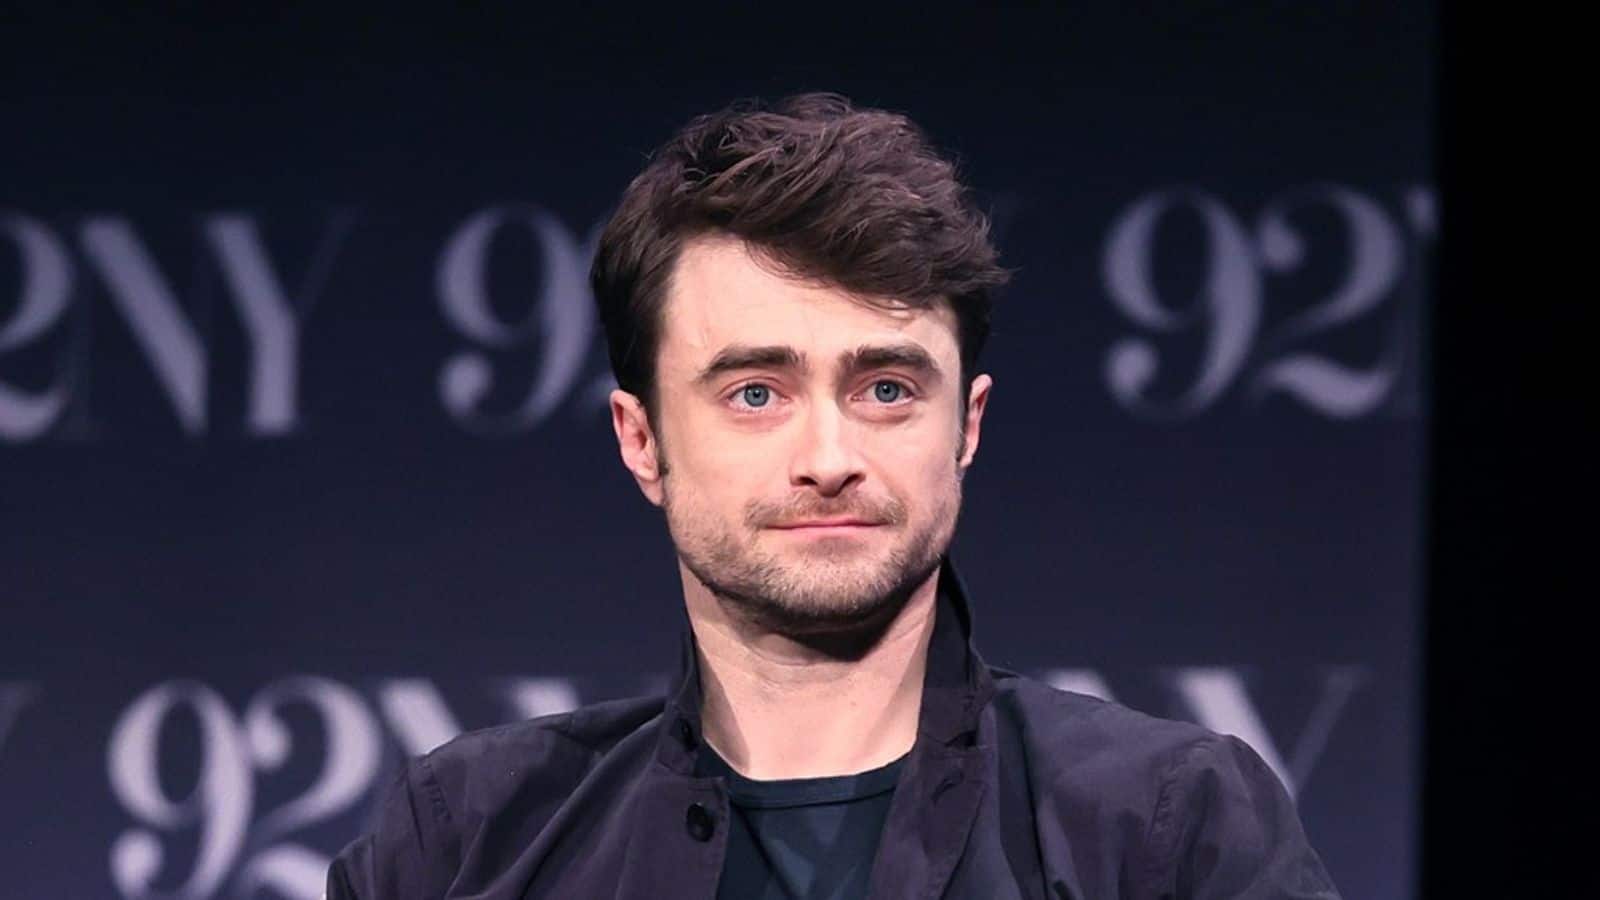 'Really sad': Daniel Radcliffe expresses disappointment over Rowling's transgender views